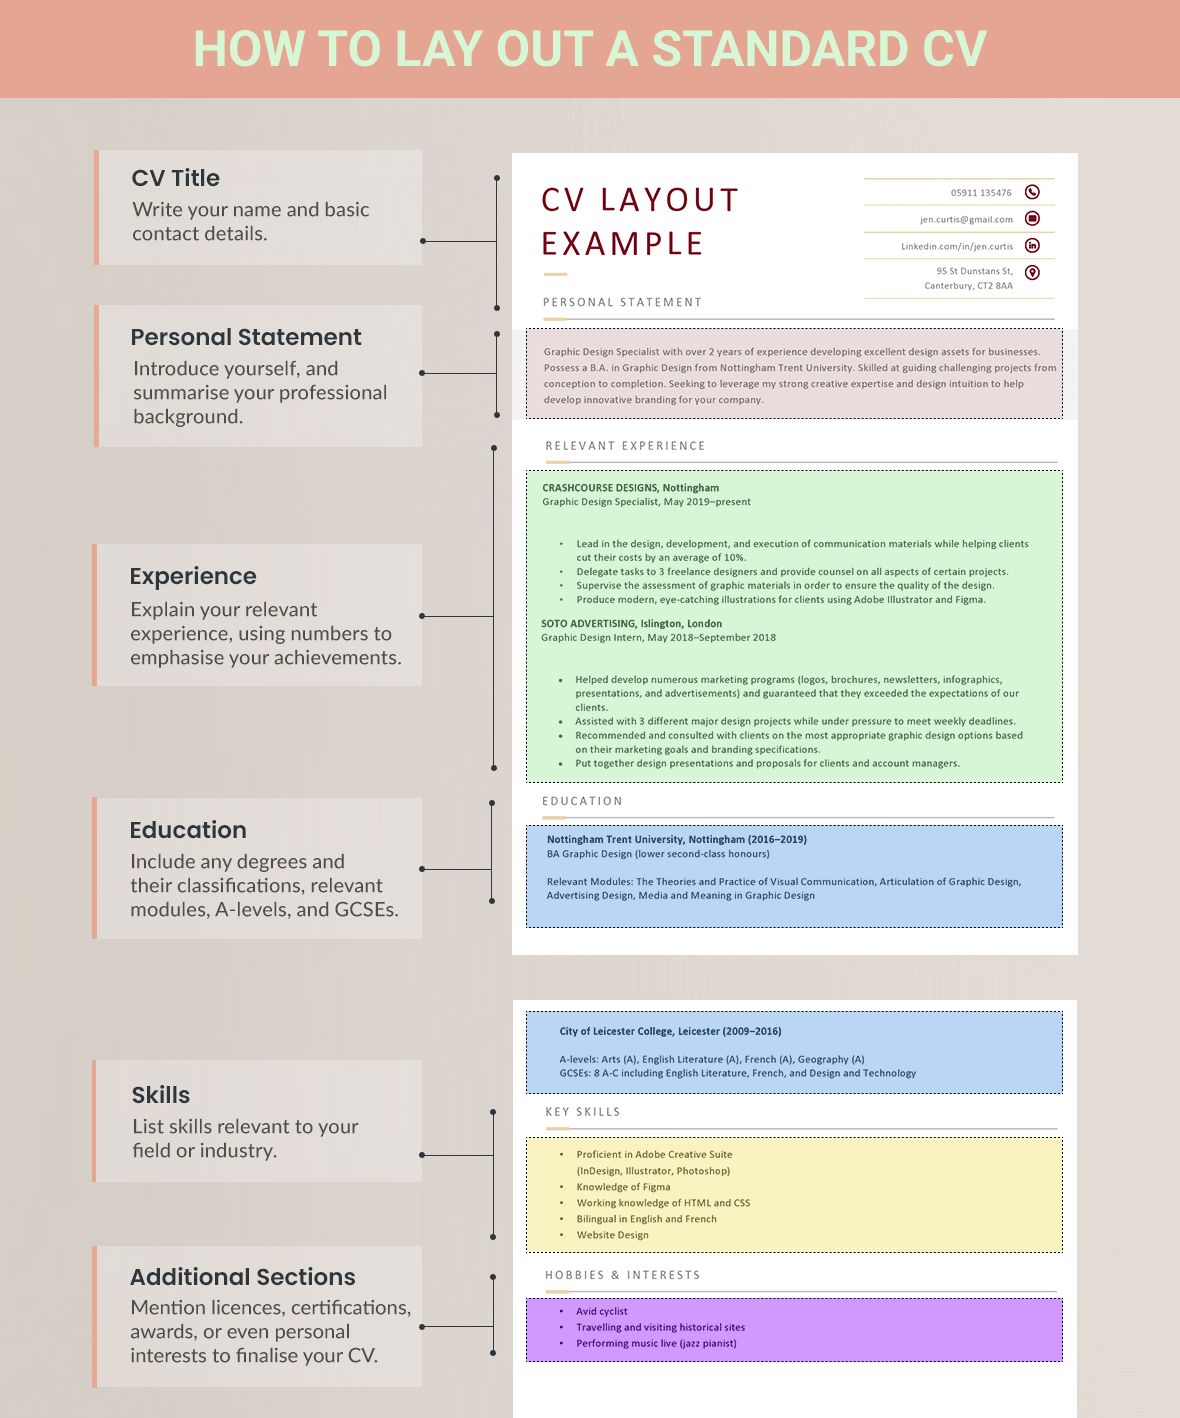 A CV layout infographic that shows how to set out a standard CV with coloured boxes highlighting each CV section